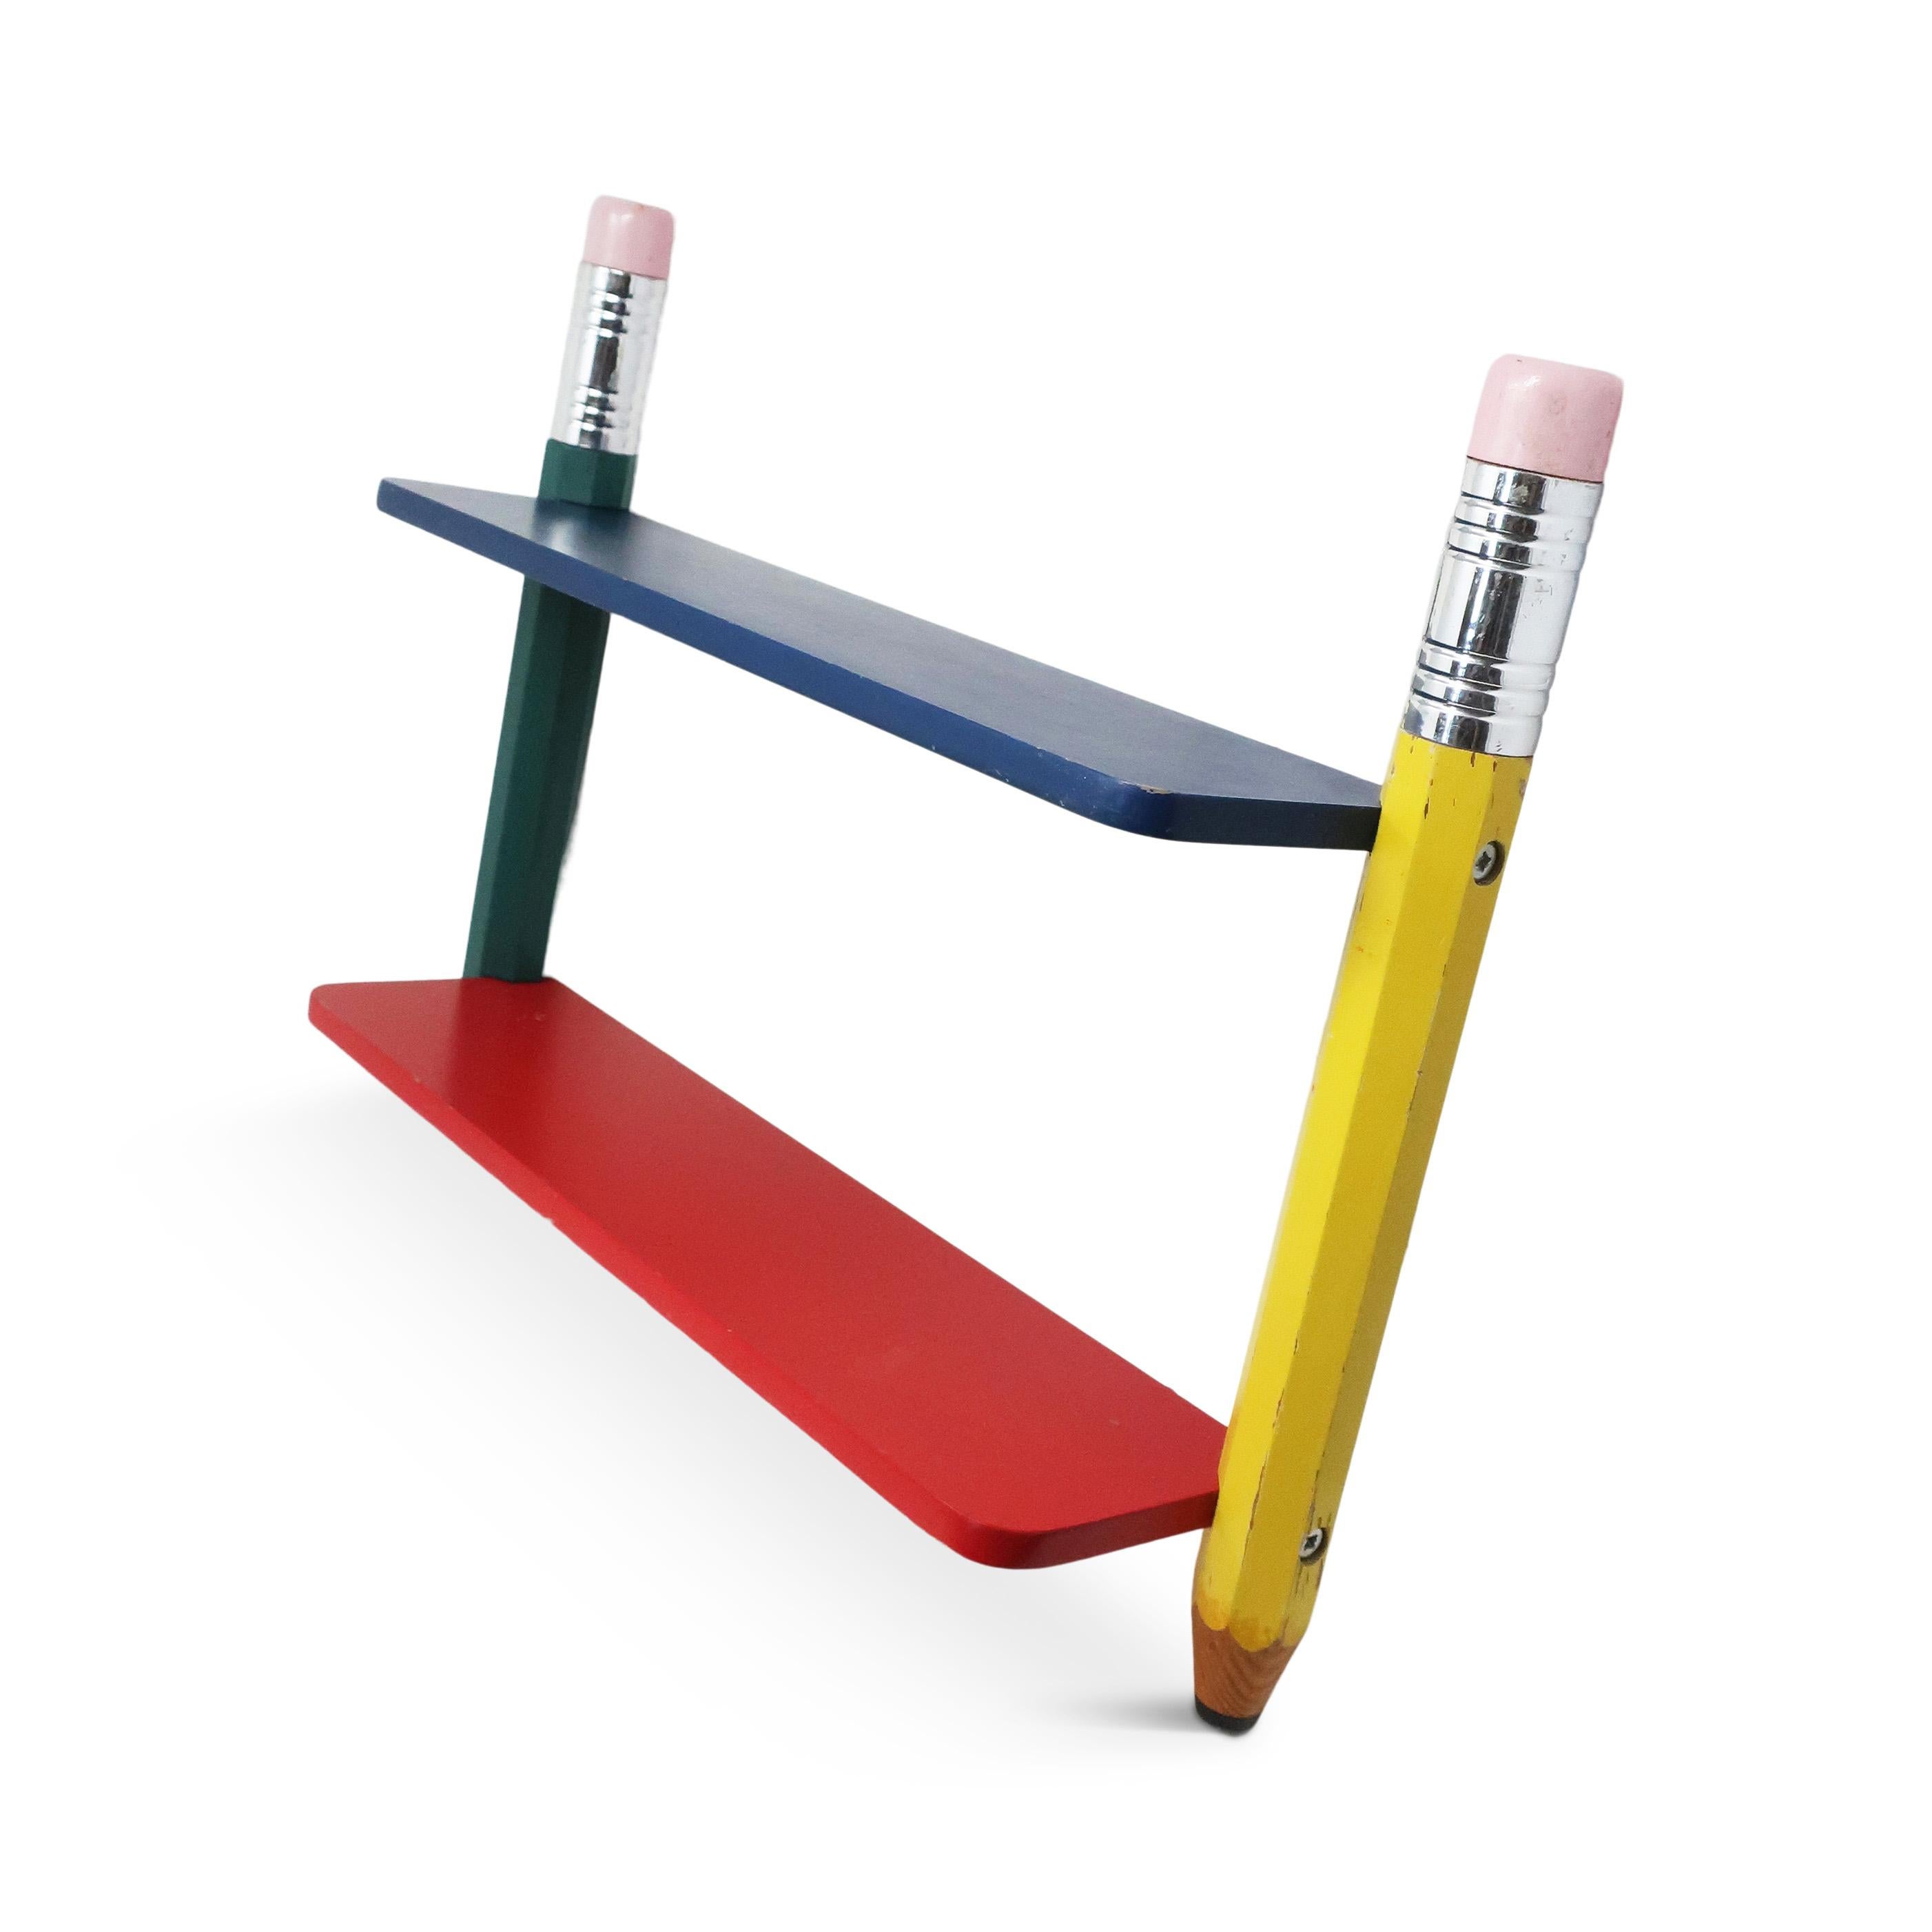 A great piece from Pierre Sala’s postmodern pencil themed children’s furniture from the 1980s for Pierre Sala Furniture. Design is composed of two shelves, one blue and red, supported by two pencils, one yellow and one green. Includes rings on rear